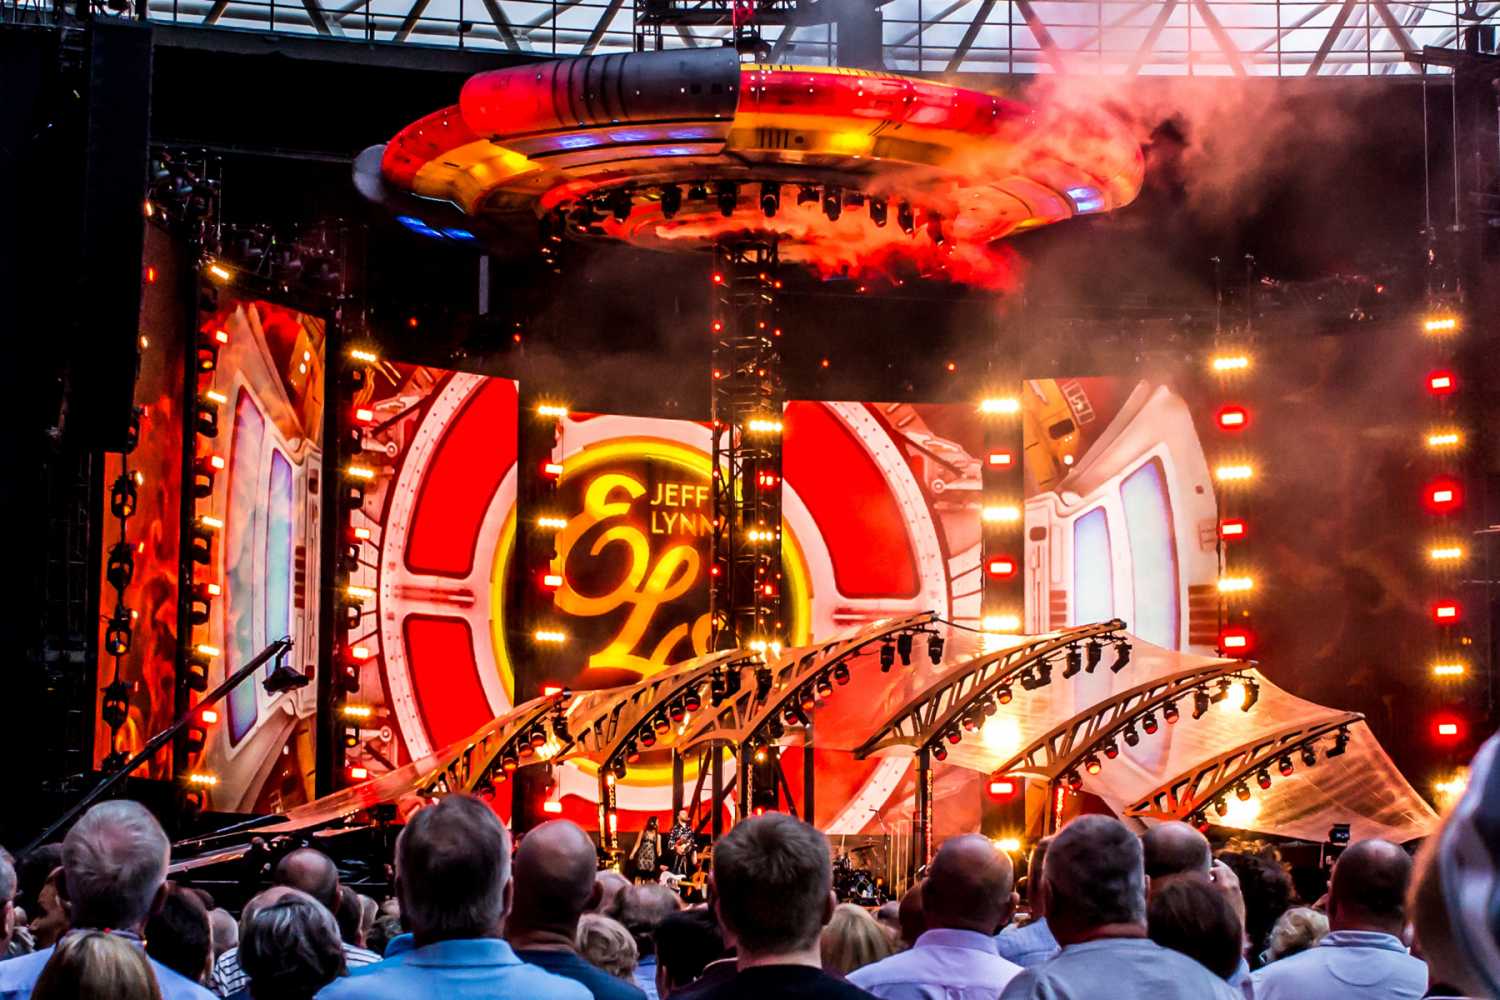 ELO - Alone in the Universe at Wembley (photo: Kris Goodman)